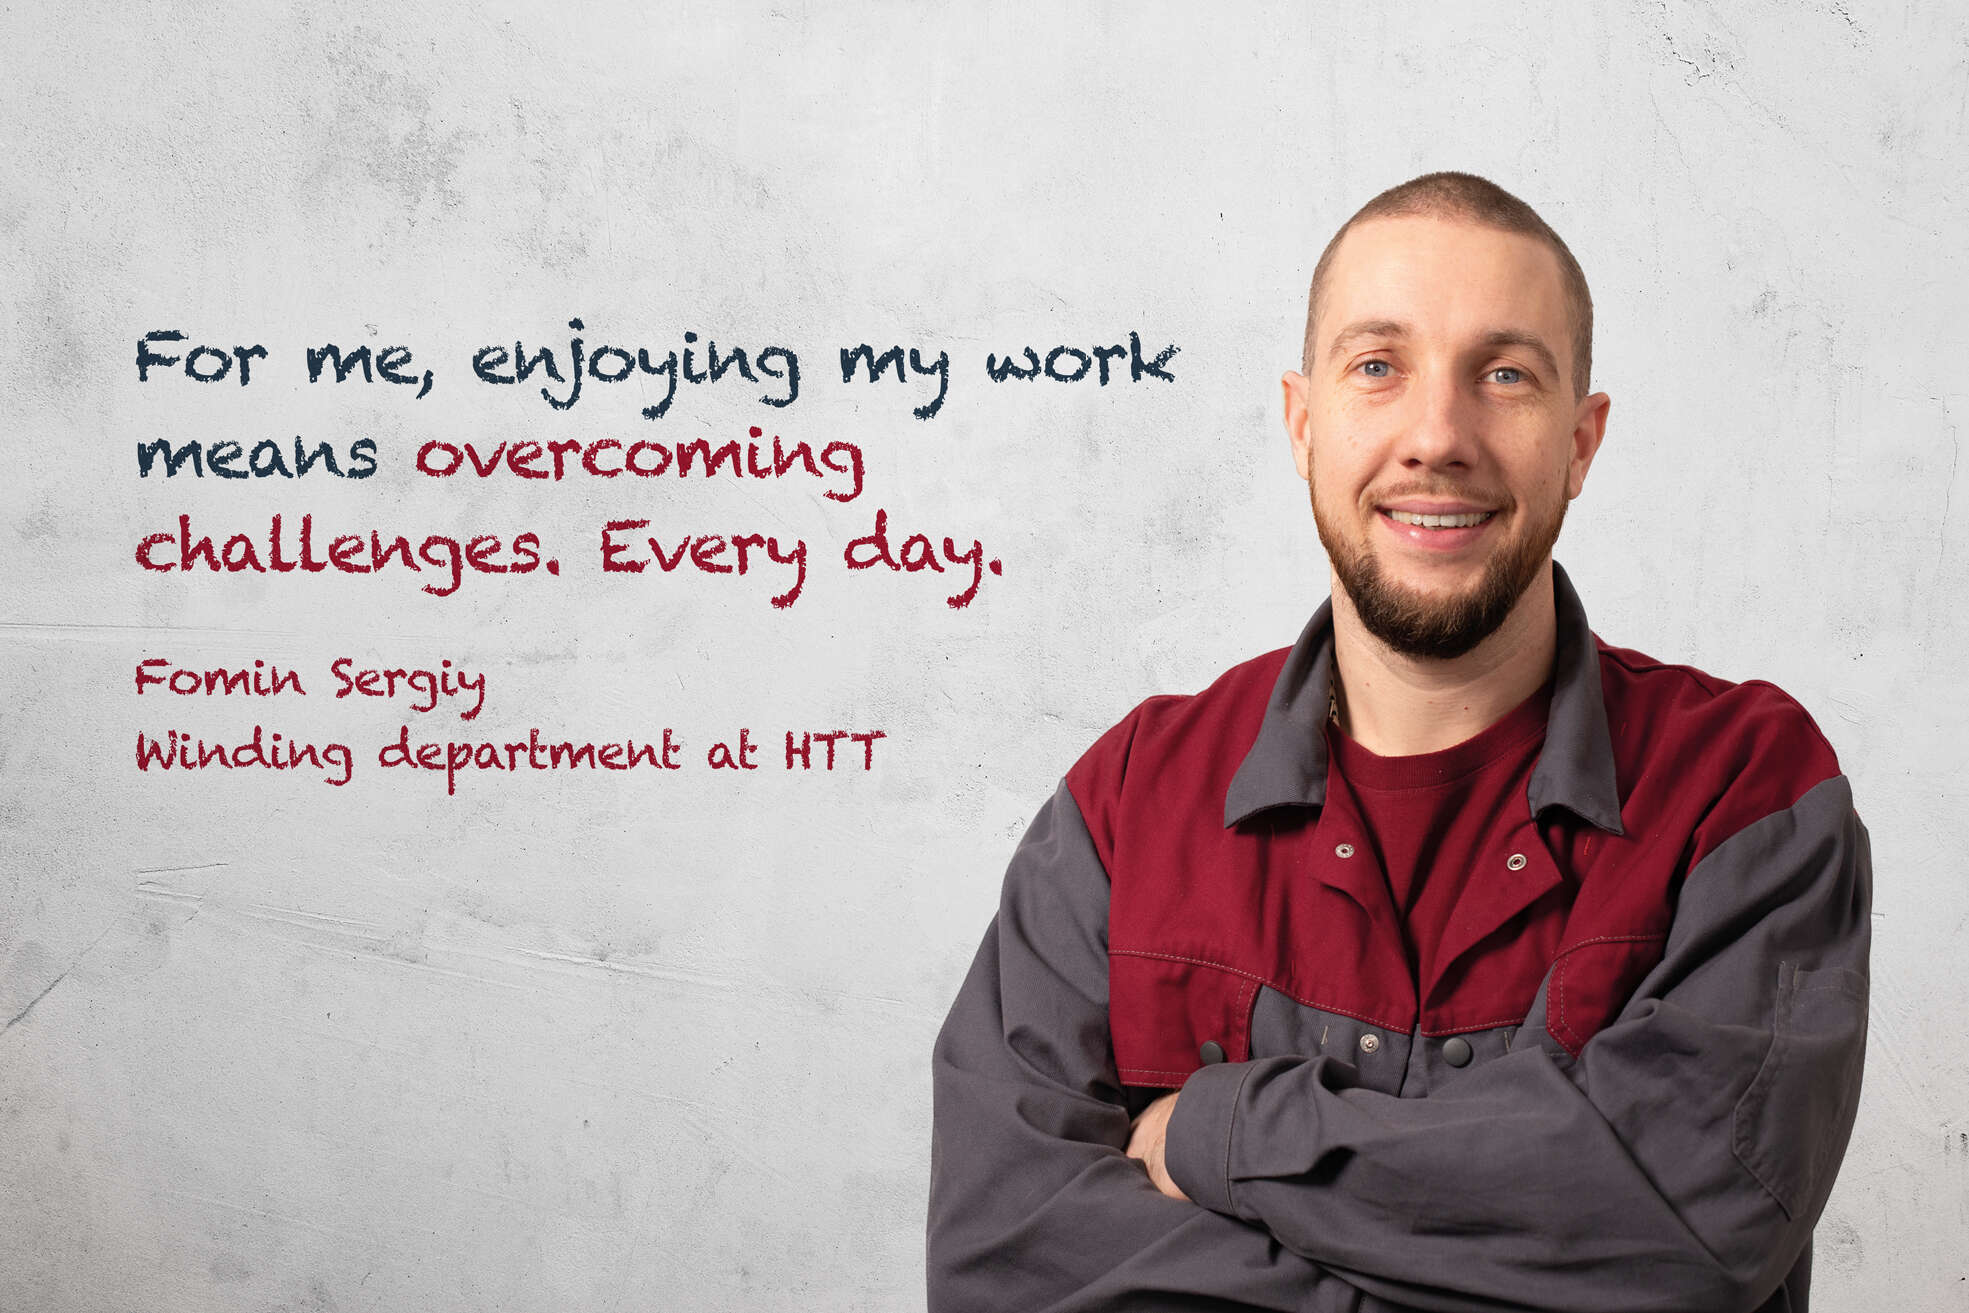 For me, enjoying my work means overcoming challenges. Every day.